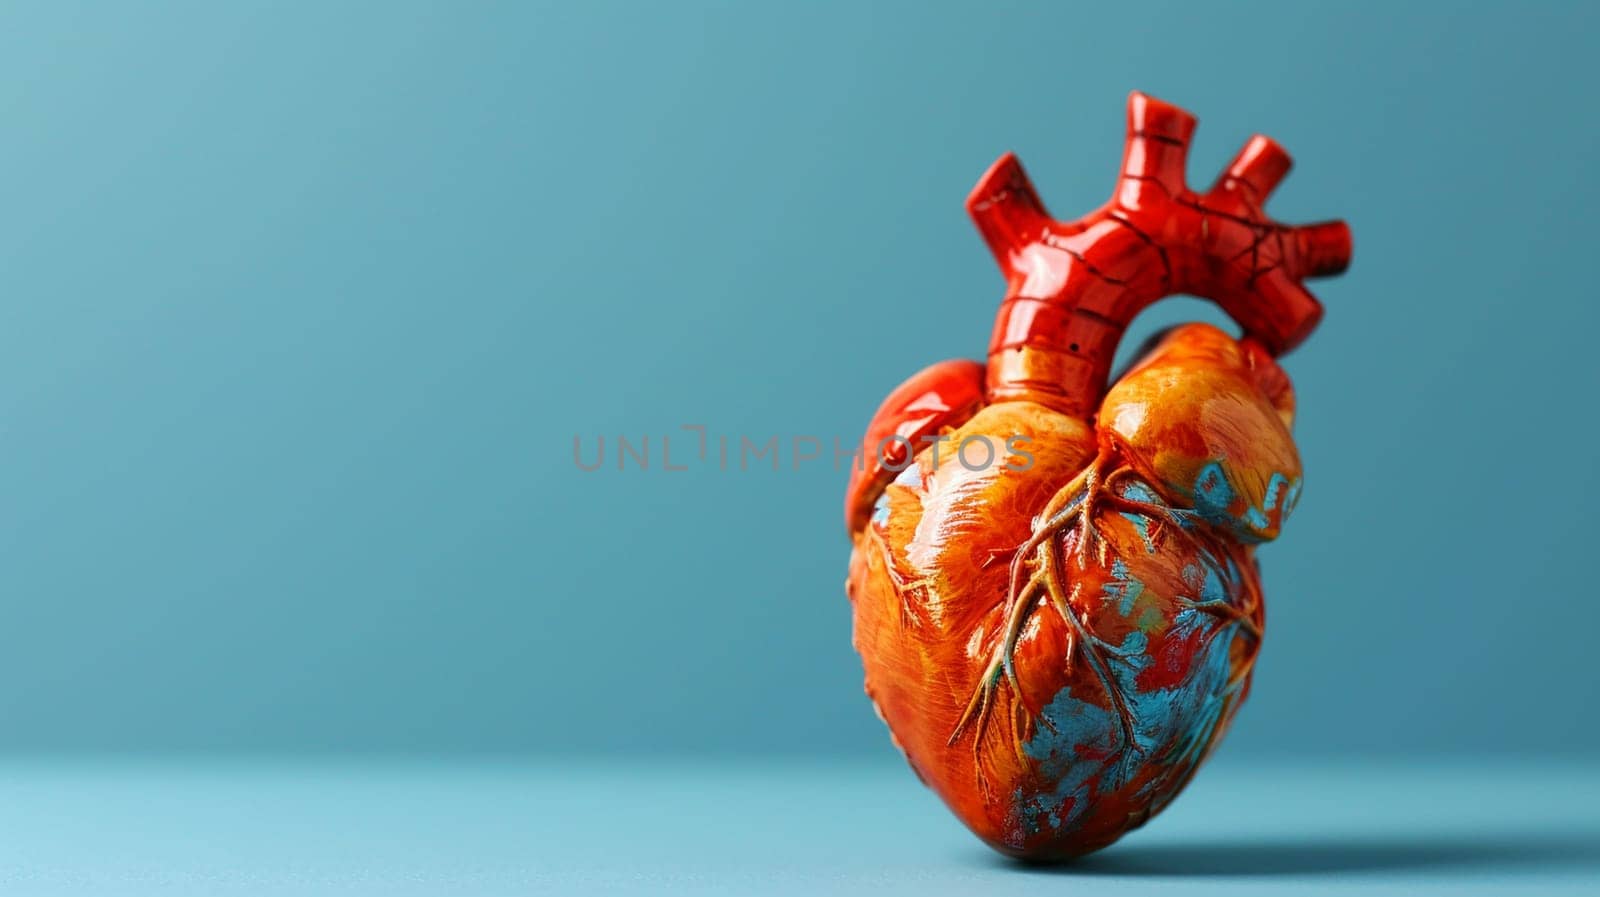 An anatomically accurate model of a human heart presented against a serene blue background, illustrating medical and health concepts.